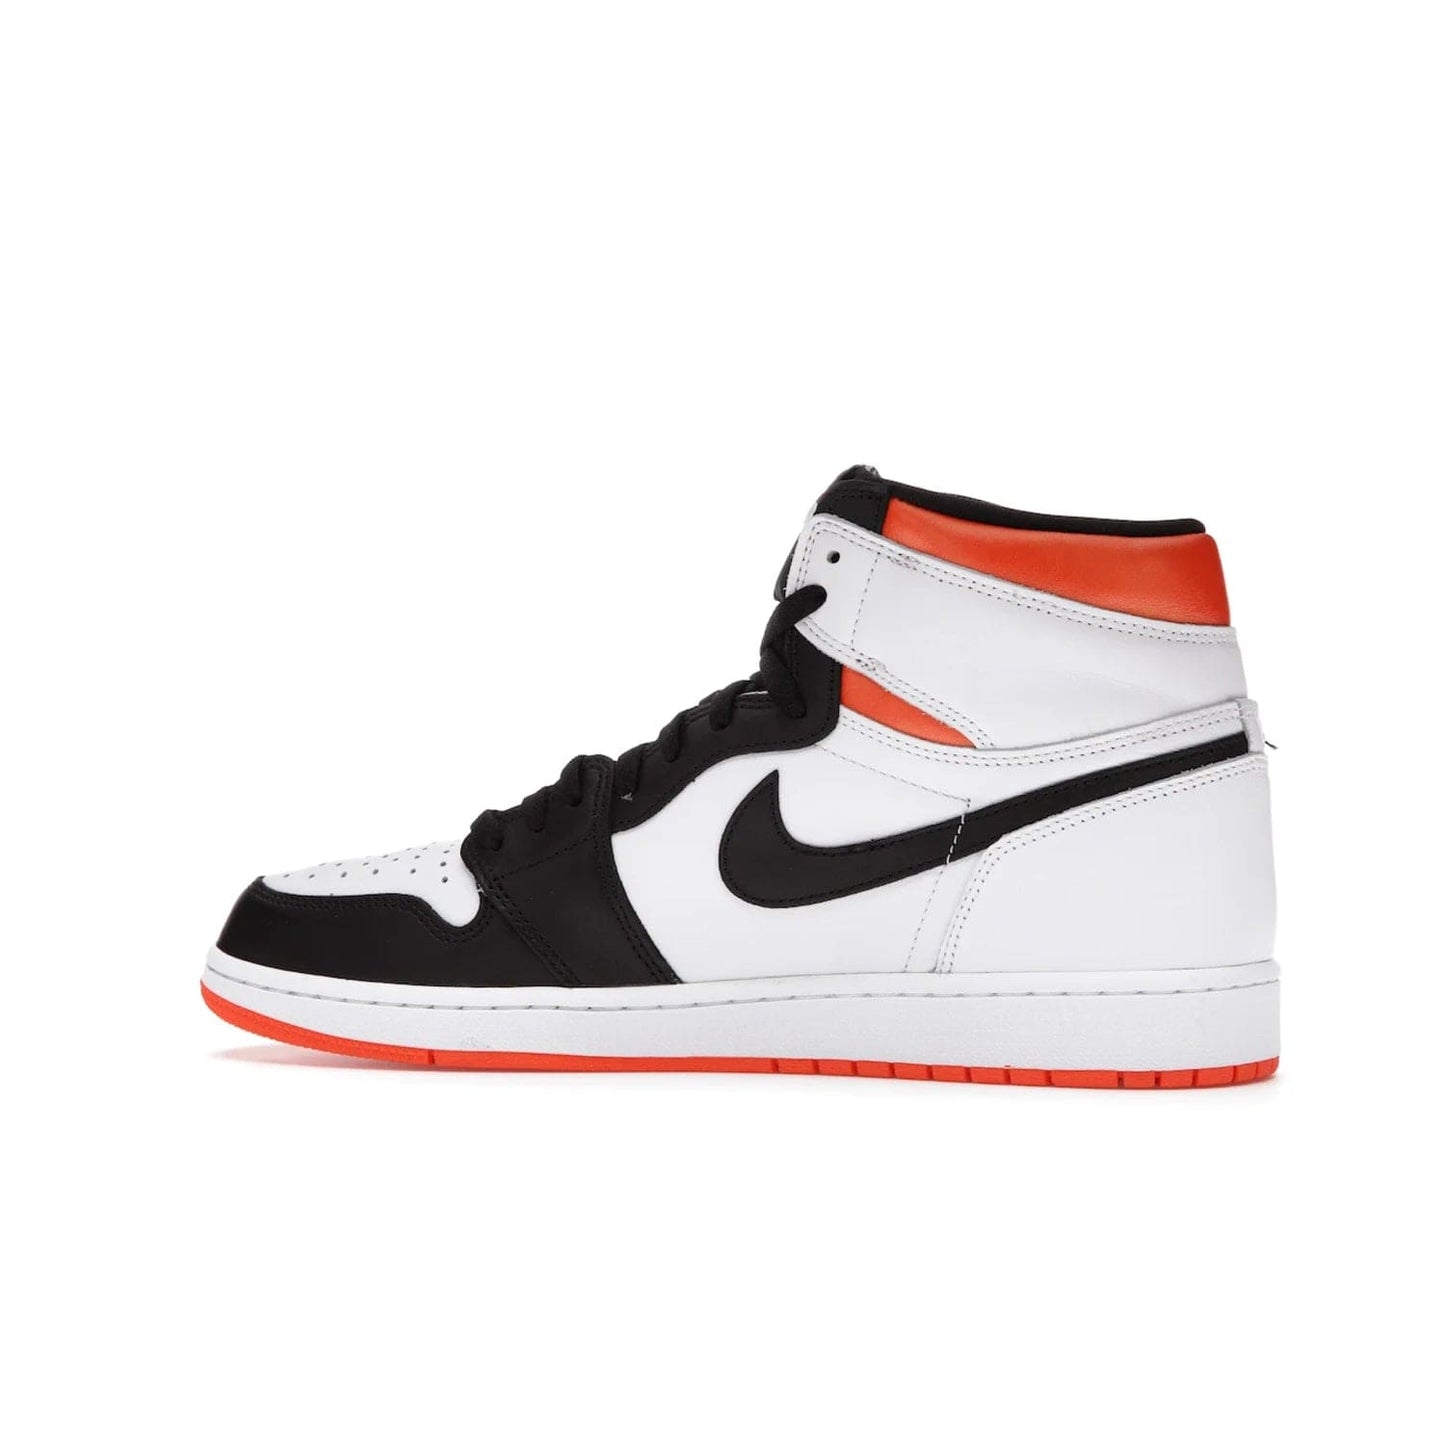 Jordan 1 Retro High Electro Orange - Image 21 - Only at www.BallersClubKickz.com - This Air Jordan 1 Retro High Electro Orange features a white leather upper with black overlays and vibrant Hyper Orange ankle wrap. Turn heads with this iconic design of woven tongue label and sole. Get yours today and add some serious style to your rotation.